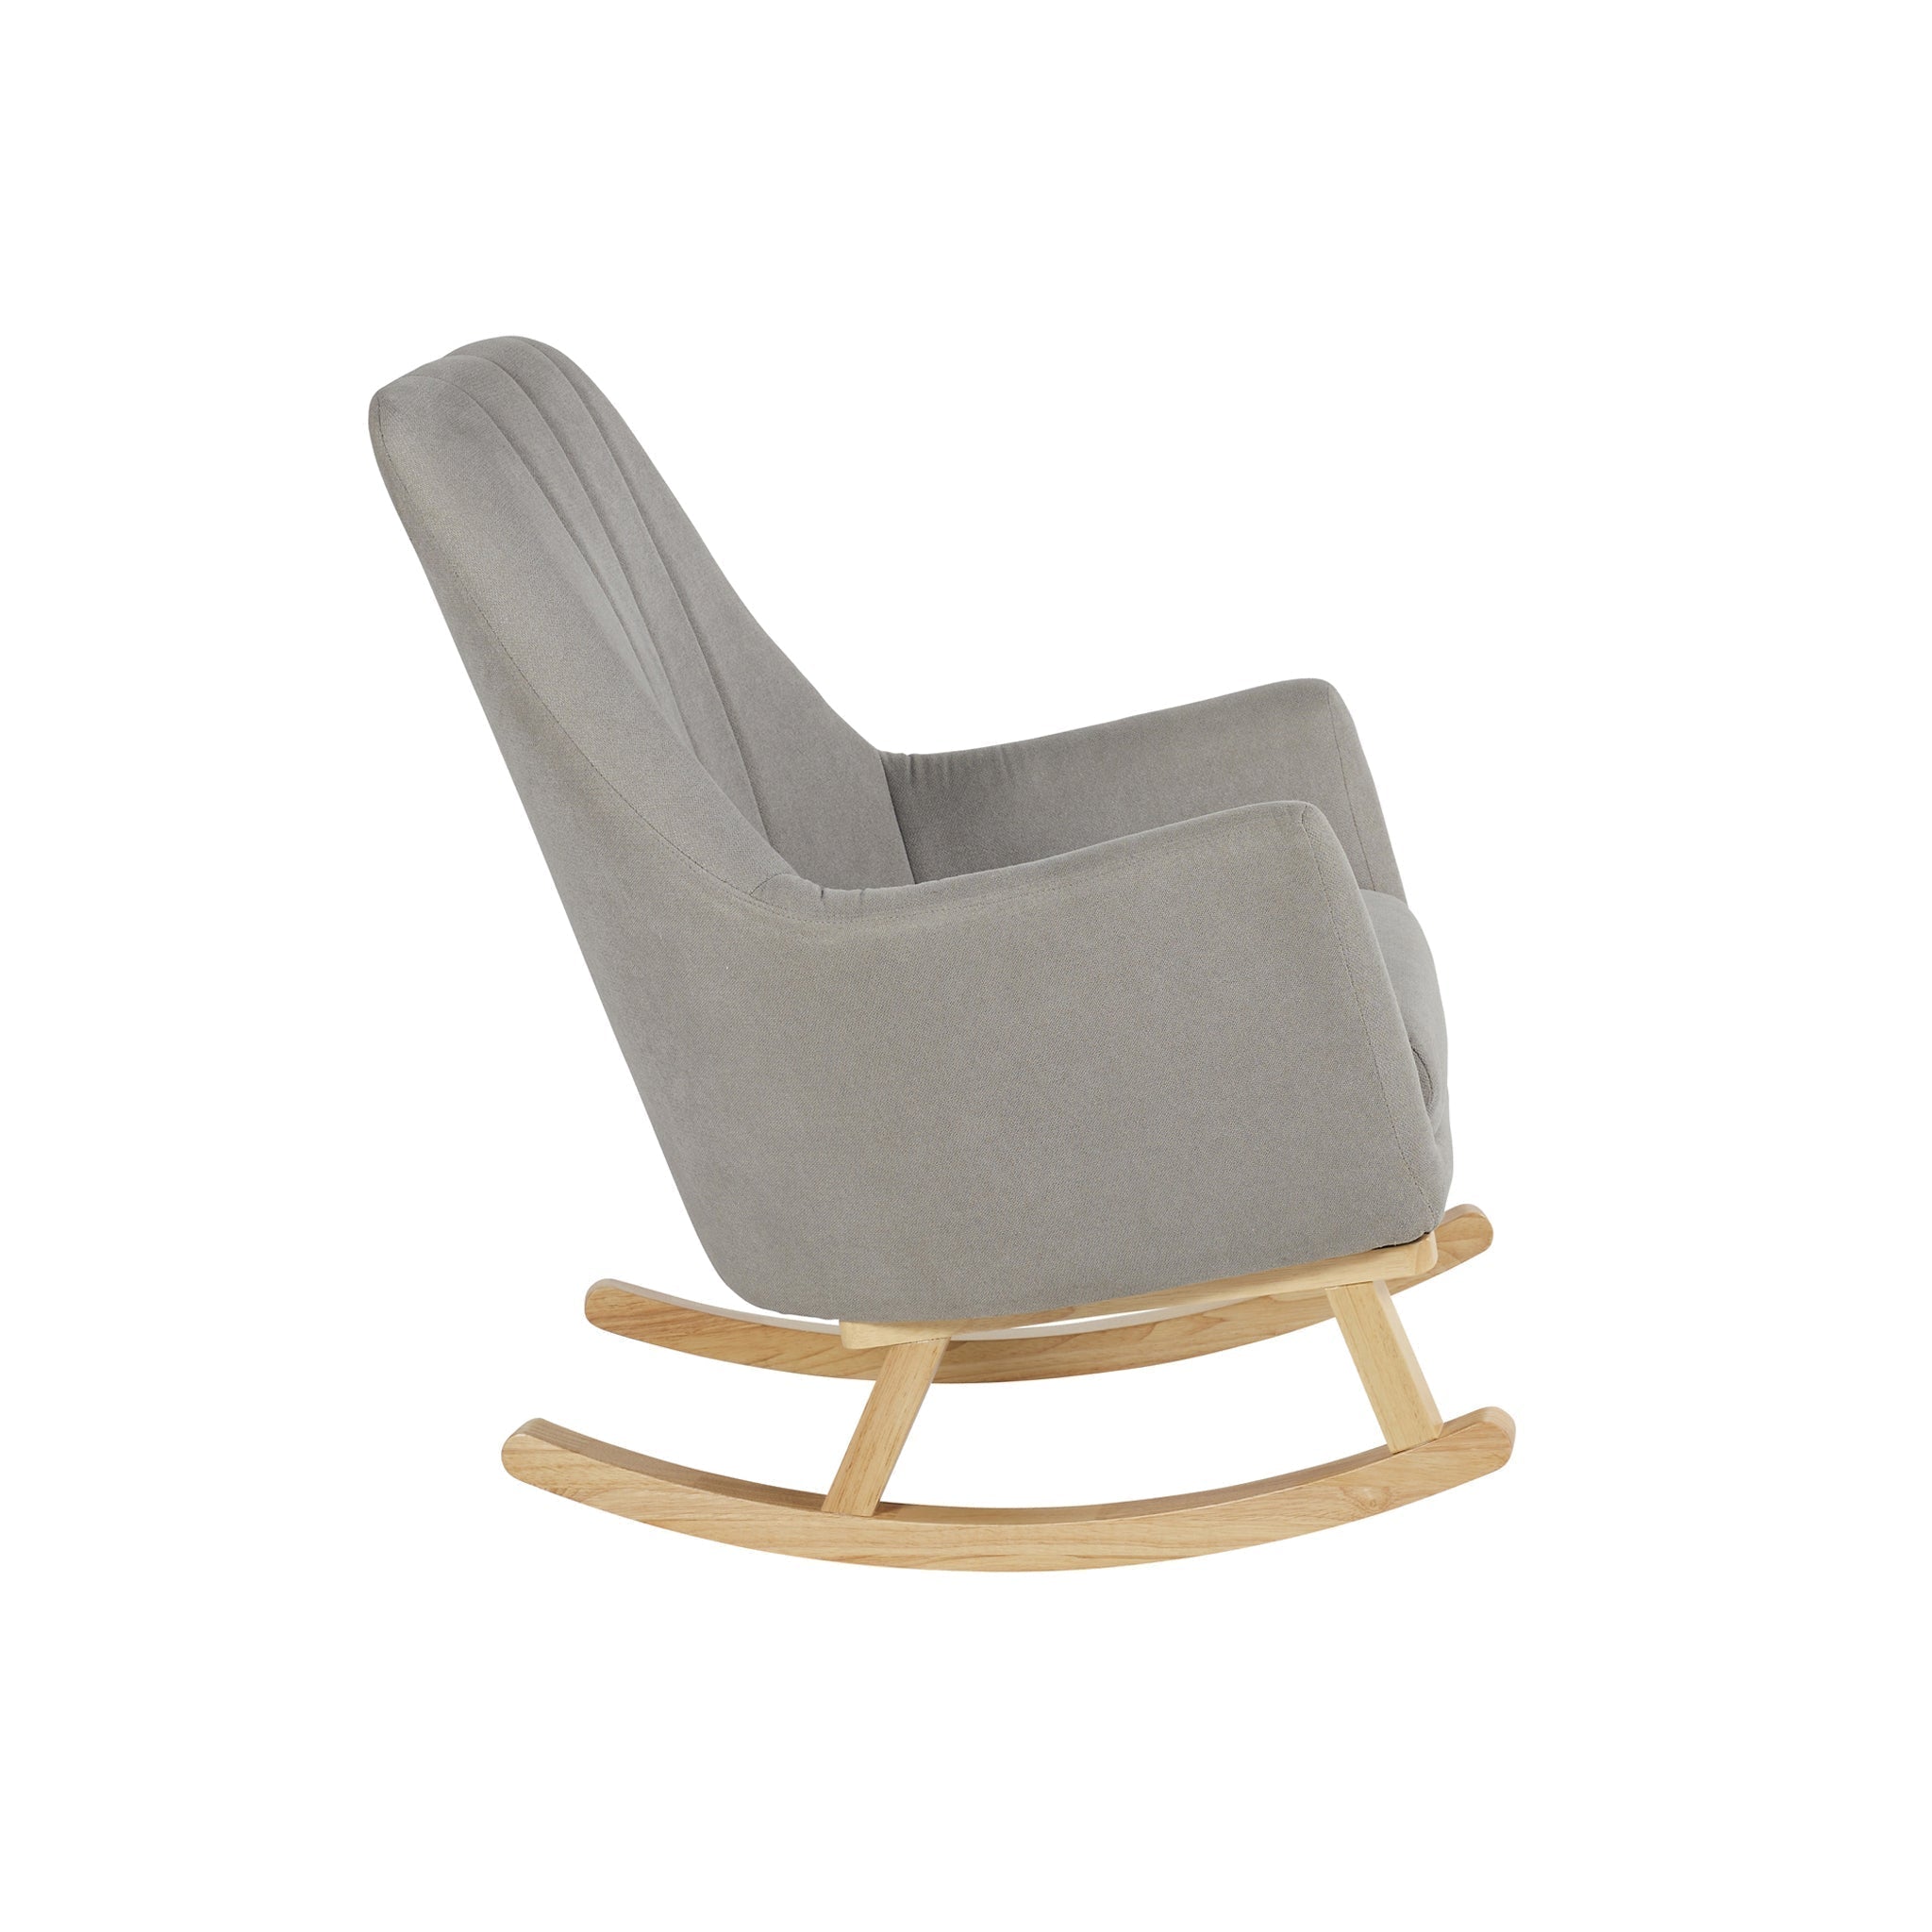 Ickle Bubba Nursing Chairs Ickle Bubba Eden Deluxe Nursery Chair Pearl Grey 48-006-000-840